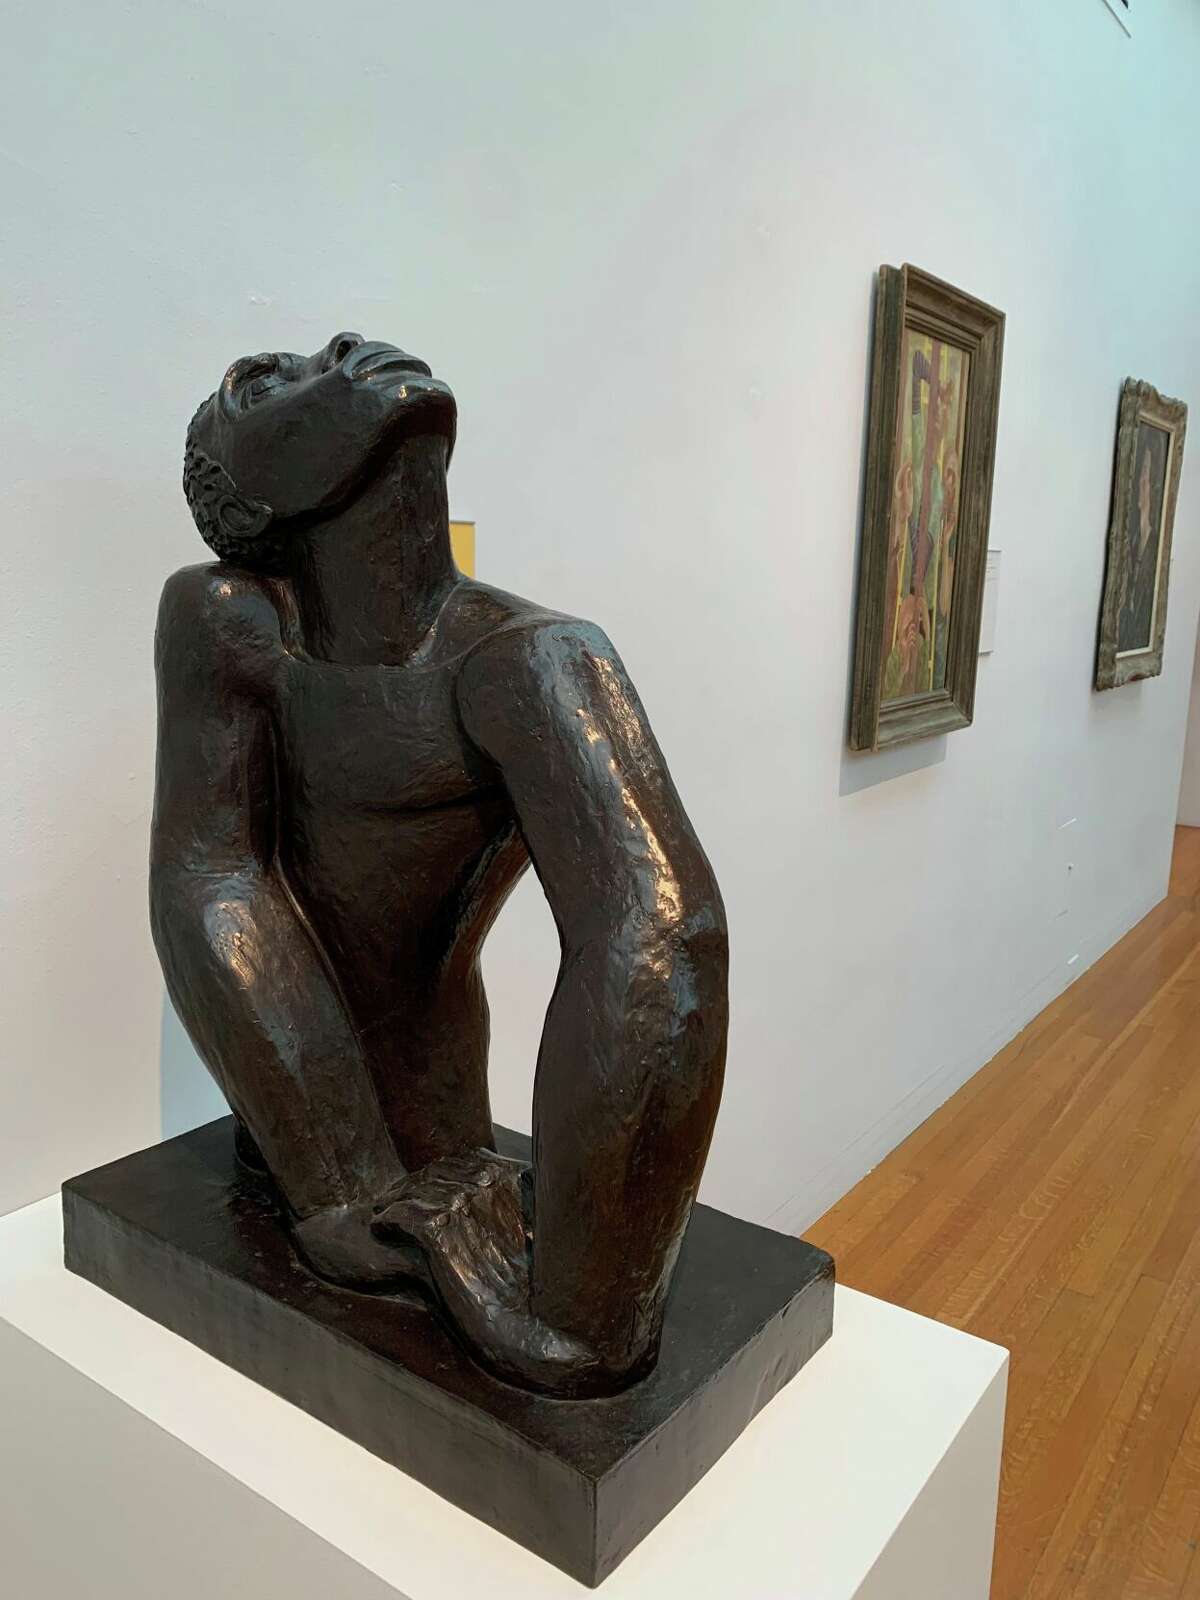 A sculpture by Jamaican artist Edna Manley on display at the Wadsworth.